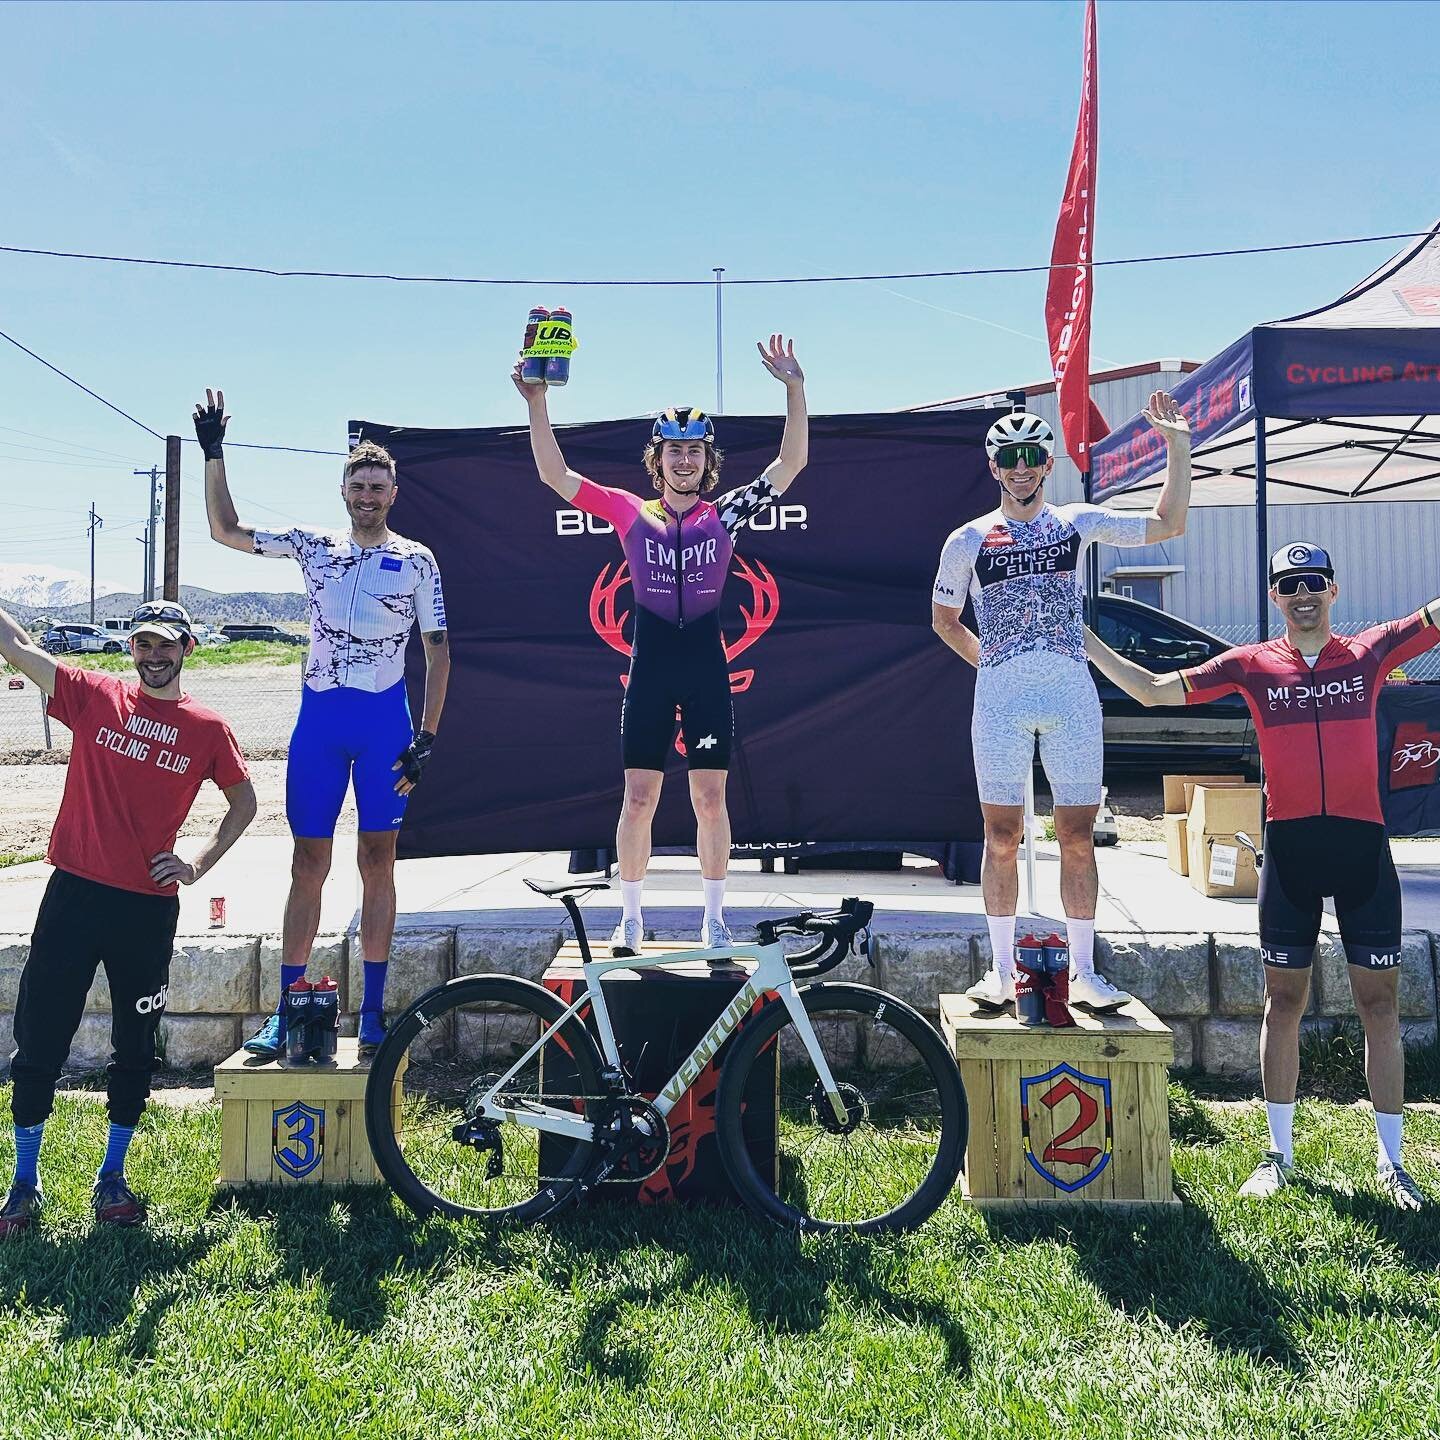 Goshen Circuit race. Jack Shuckra takes the top step out of a strong selection that rolled early in the race. This rolling ~10km circuit made the task at the front challenging. 🥵 First warm one here in Utah so far this season - nice to race without 